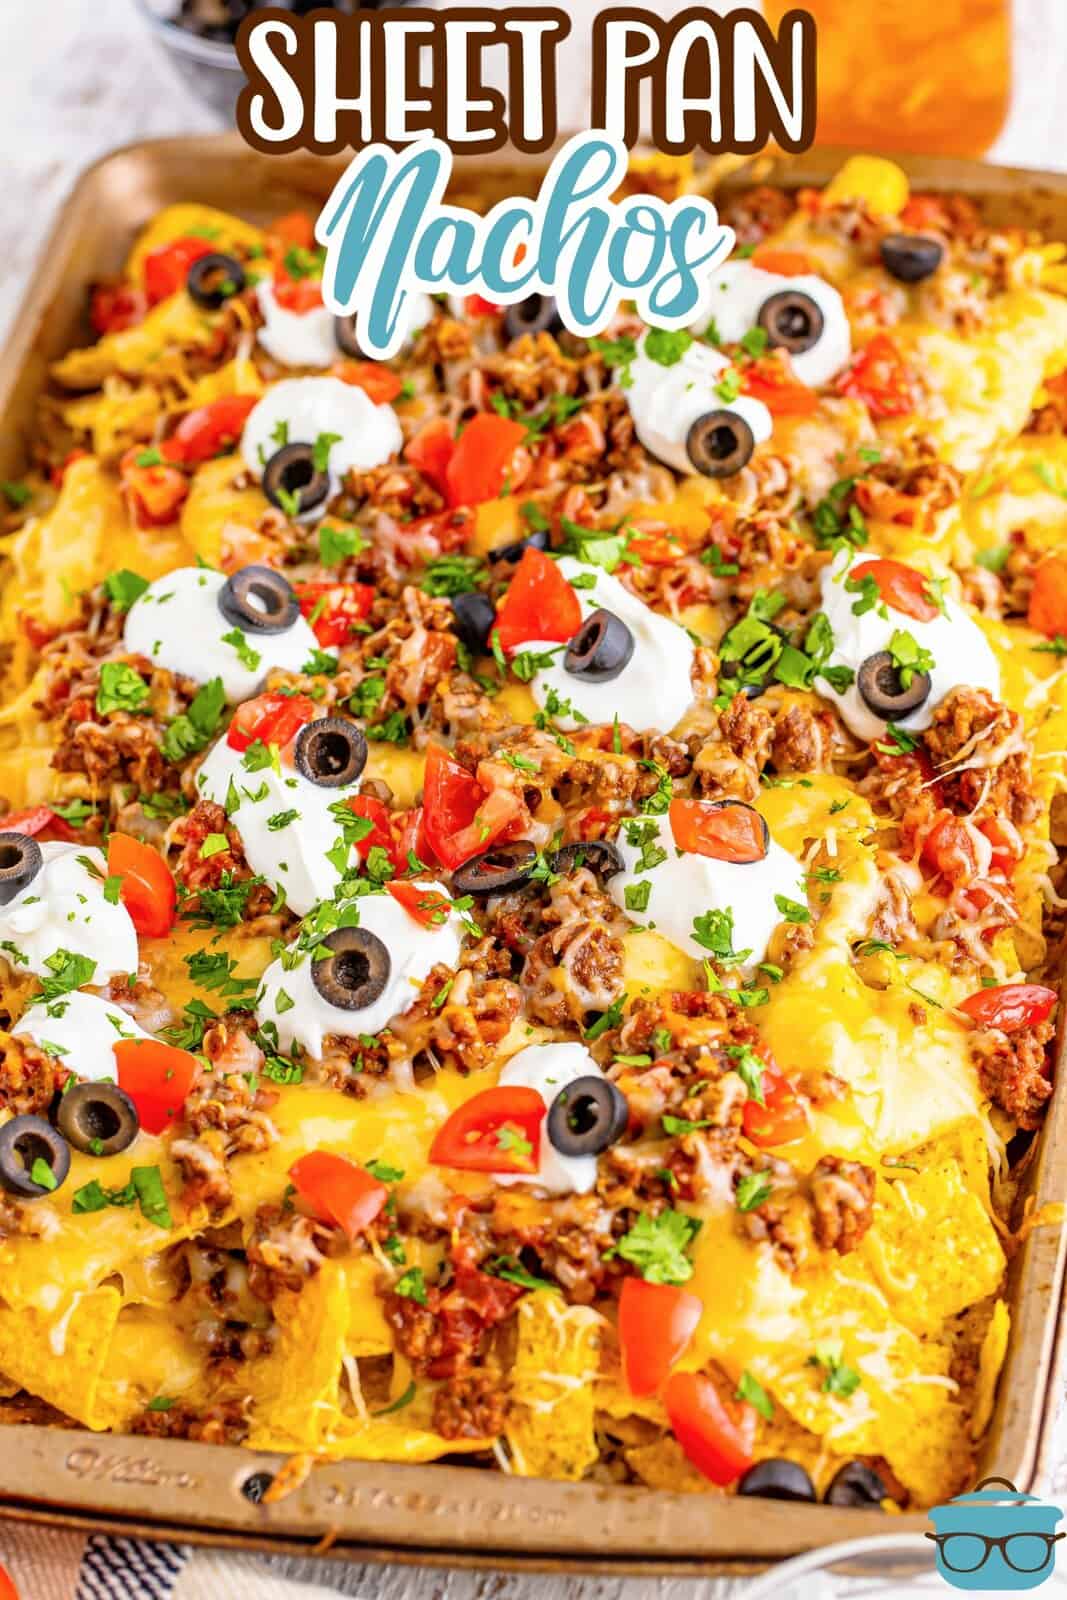 A sheet pan loaded with the ultimate nachos.